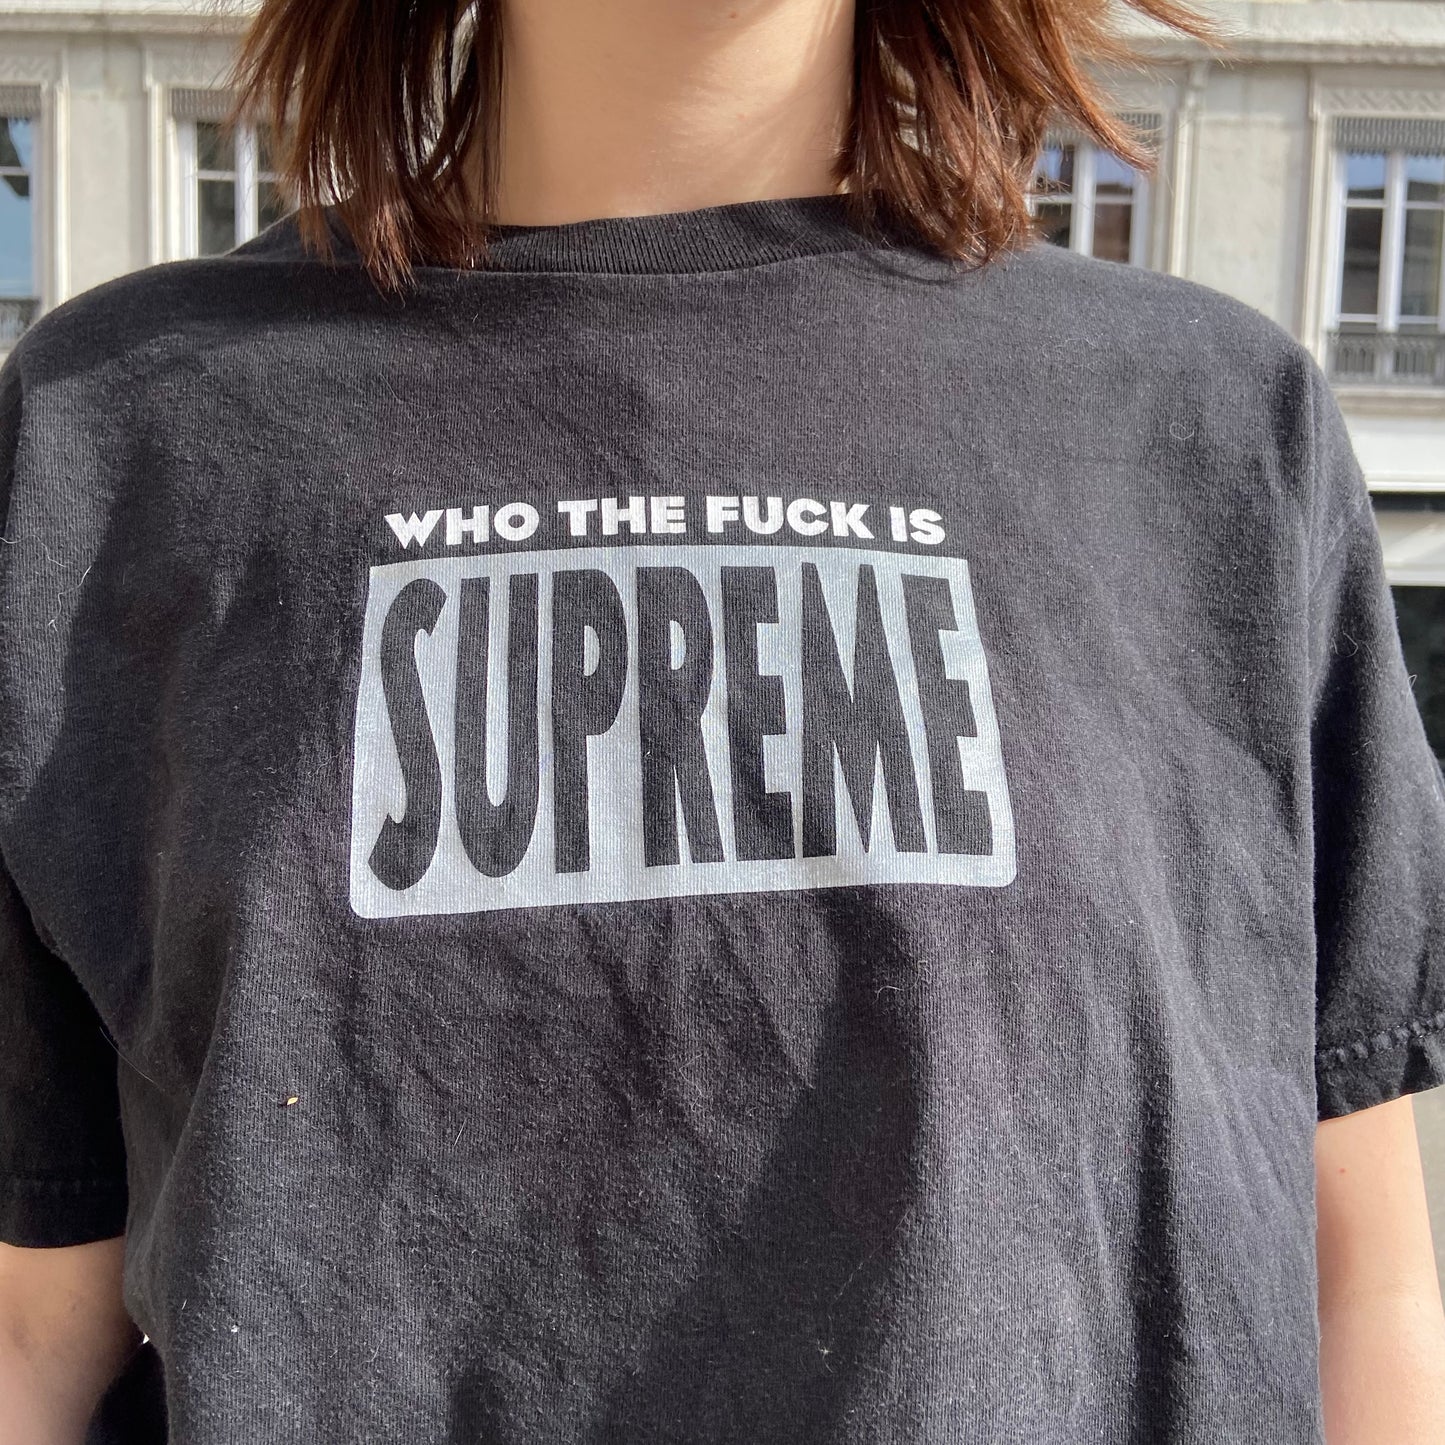 T-shirt Supreme "Who the fuck is" - M